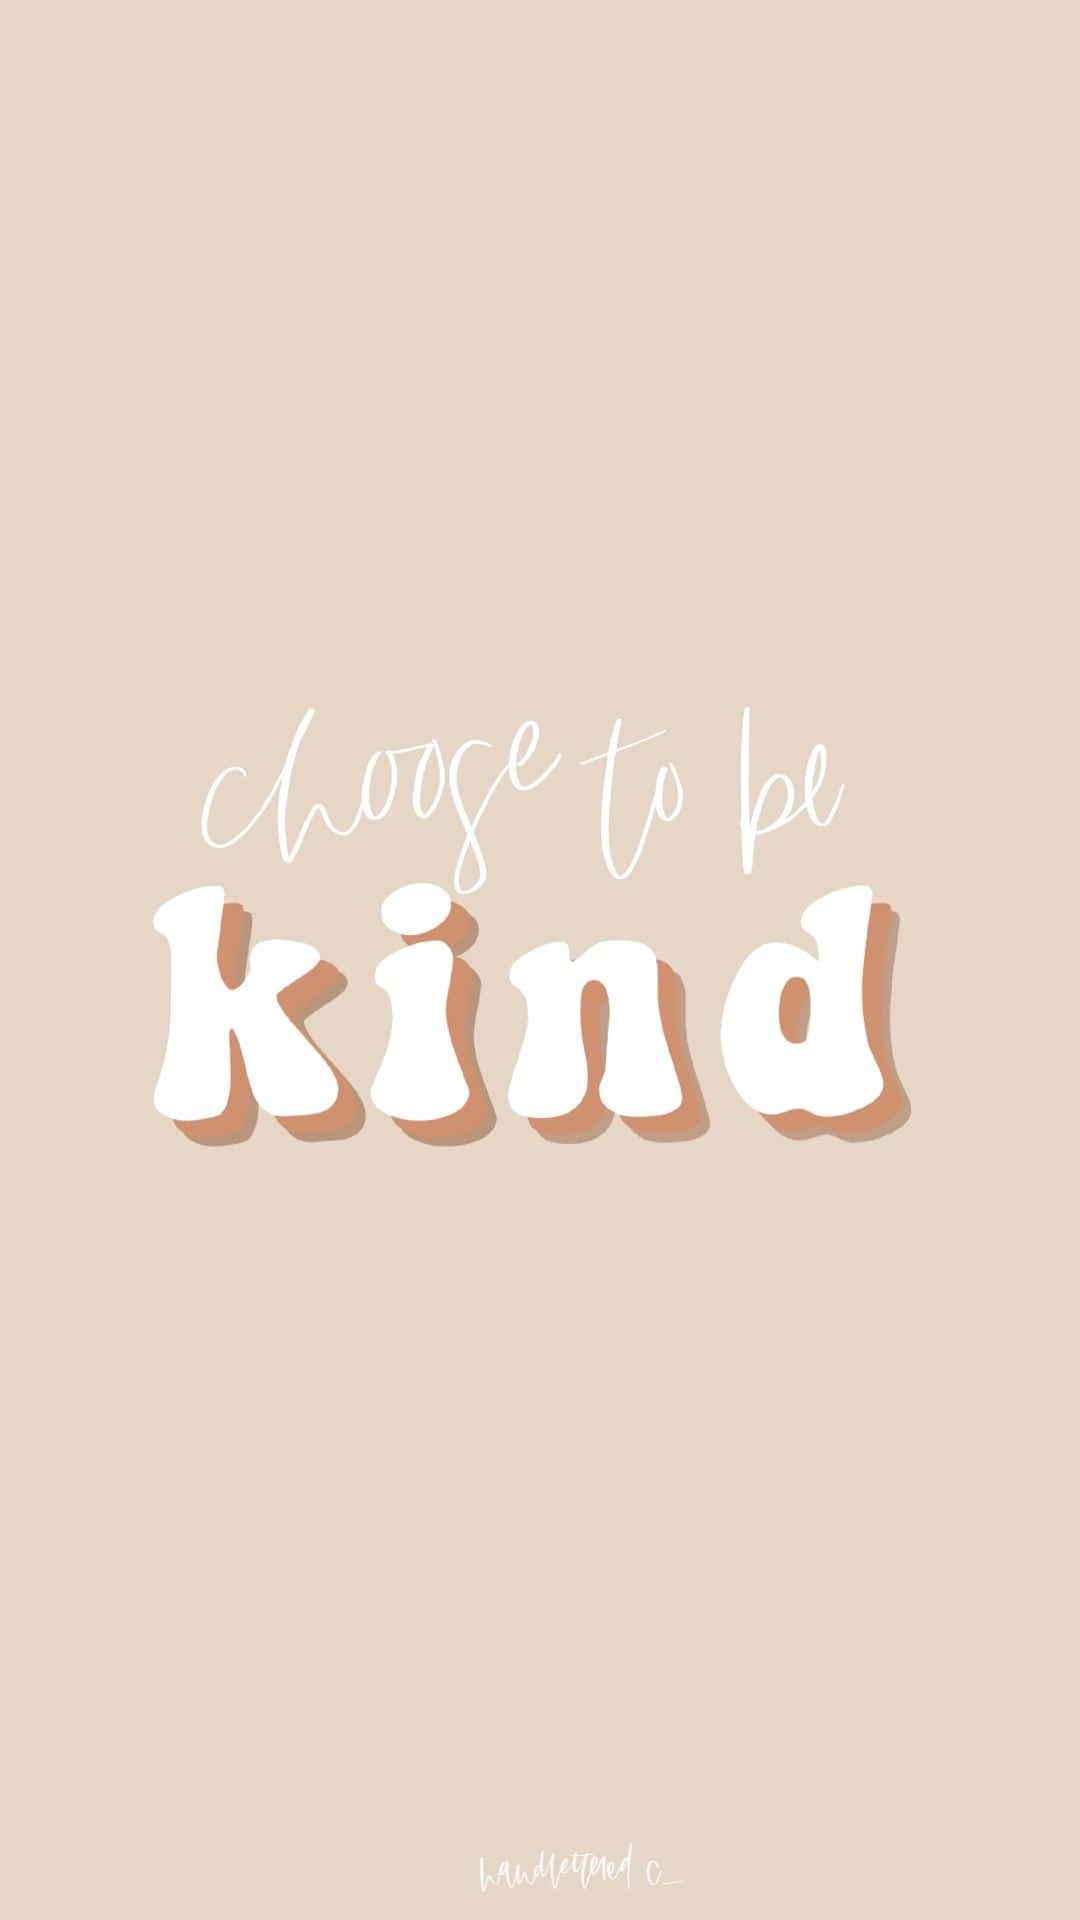 Choose To Be Kind Wallpaper